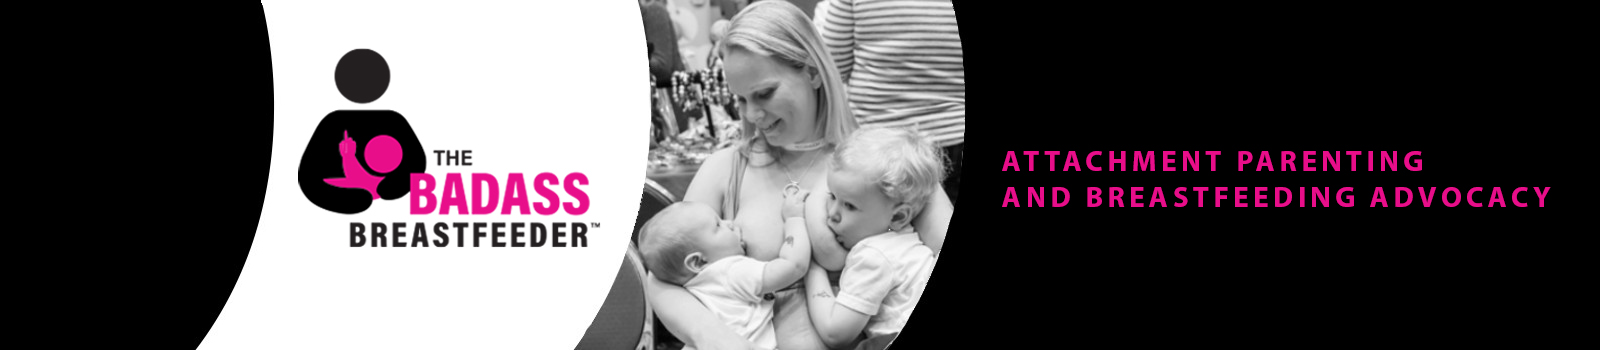 Attachment Parenting and Breastfeeding Advocacy